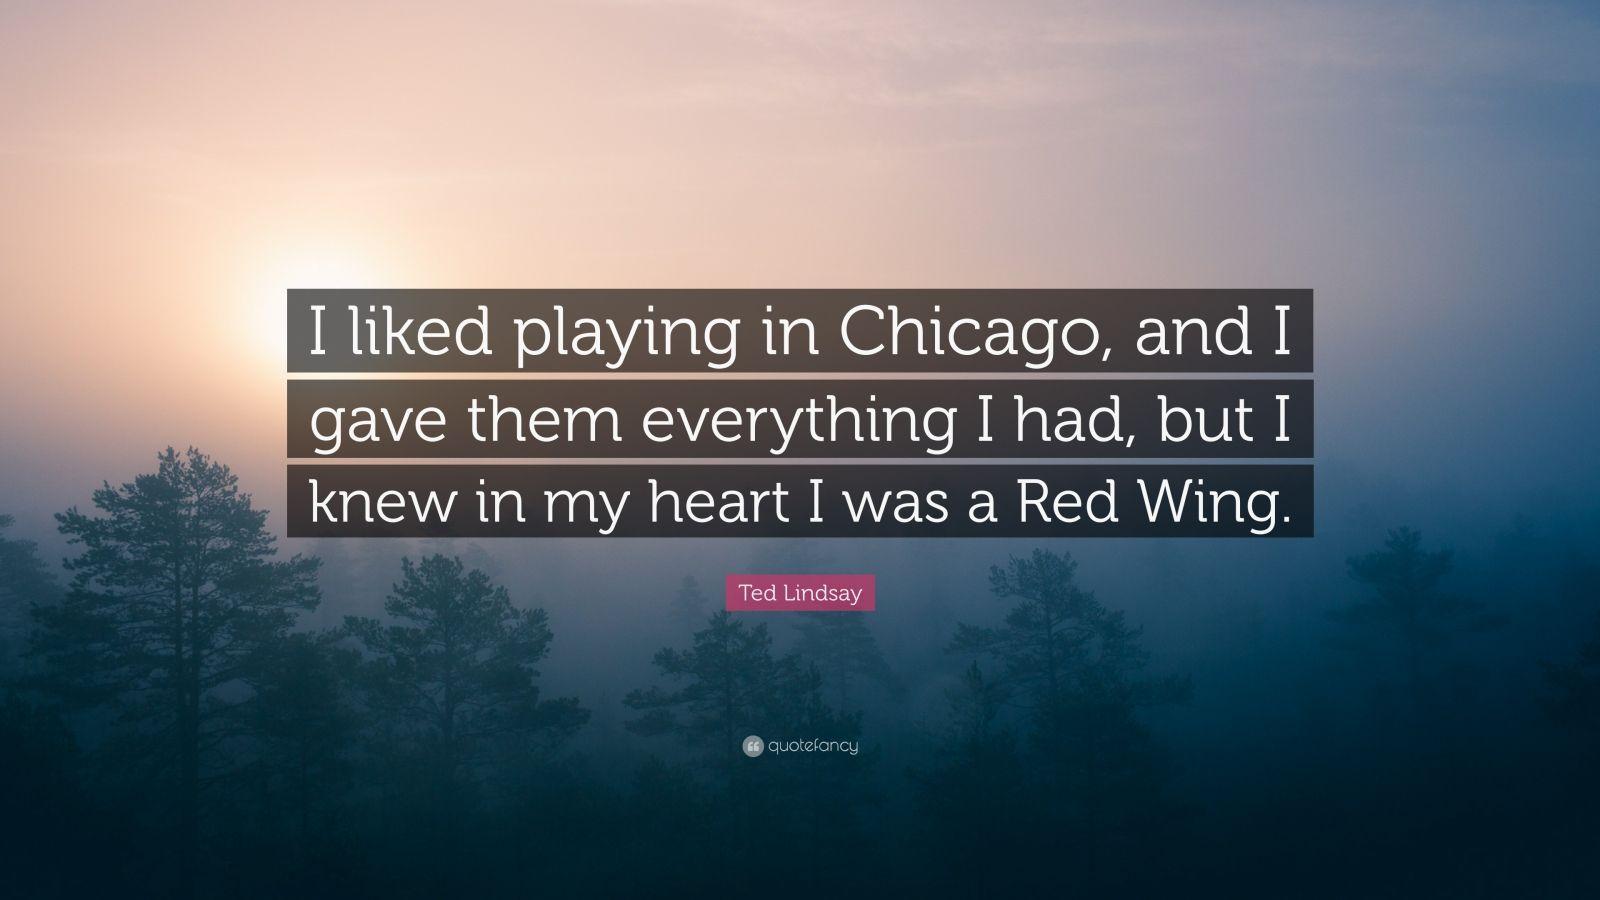 Ted Lindsay Quote: “I liked playing in Chicago, and I gave them